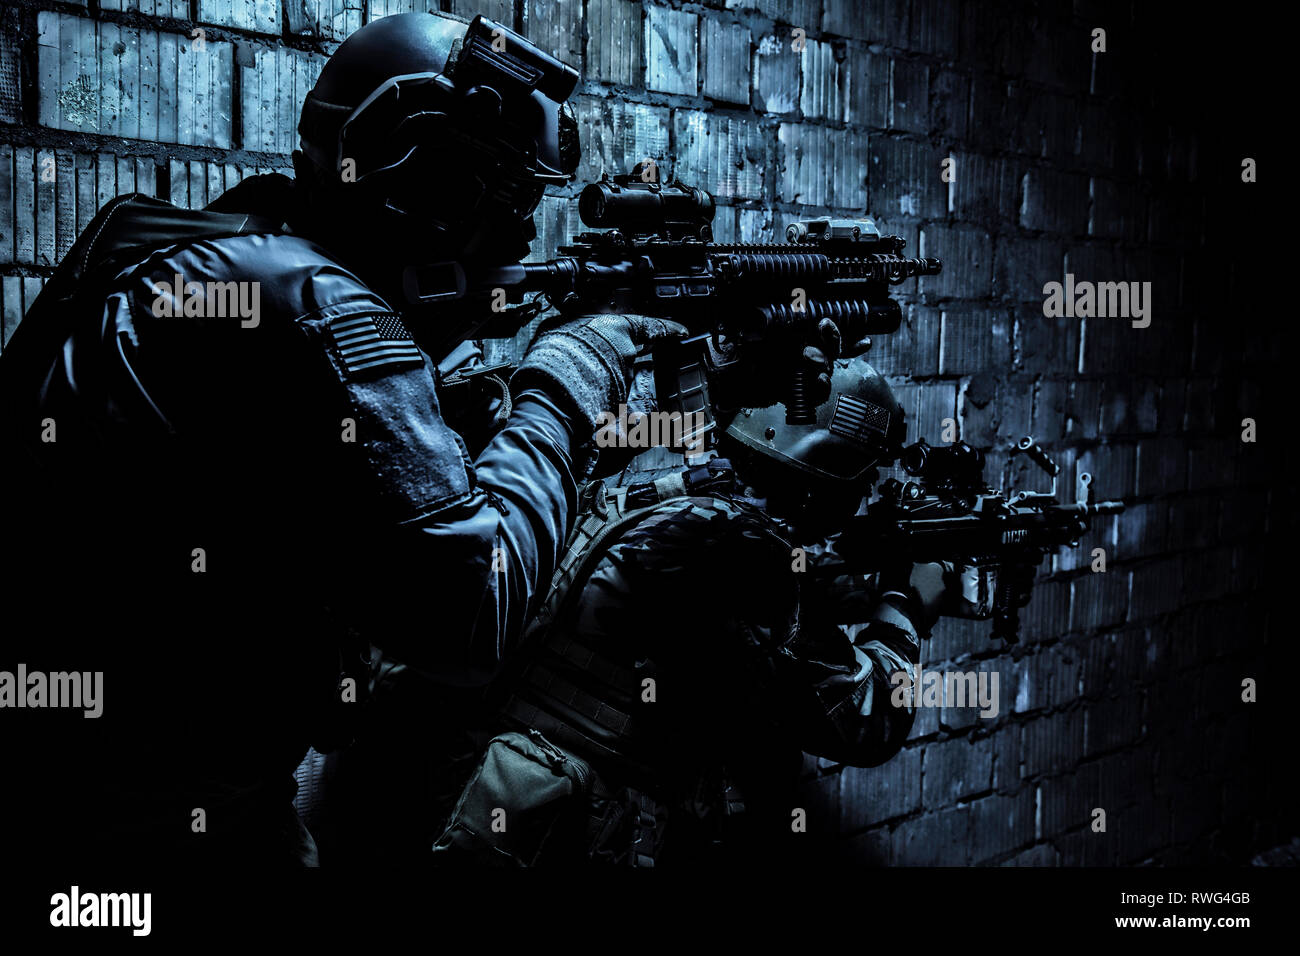 Pair of soldiers in action under the cover of darkness. Stock Photo